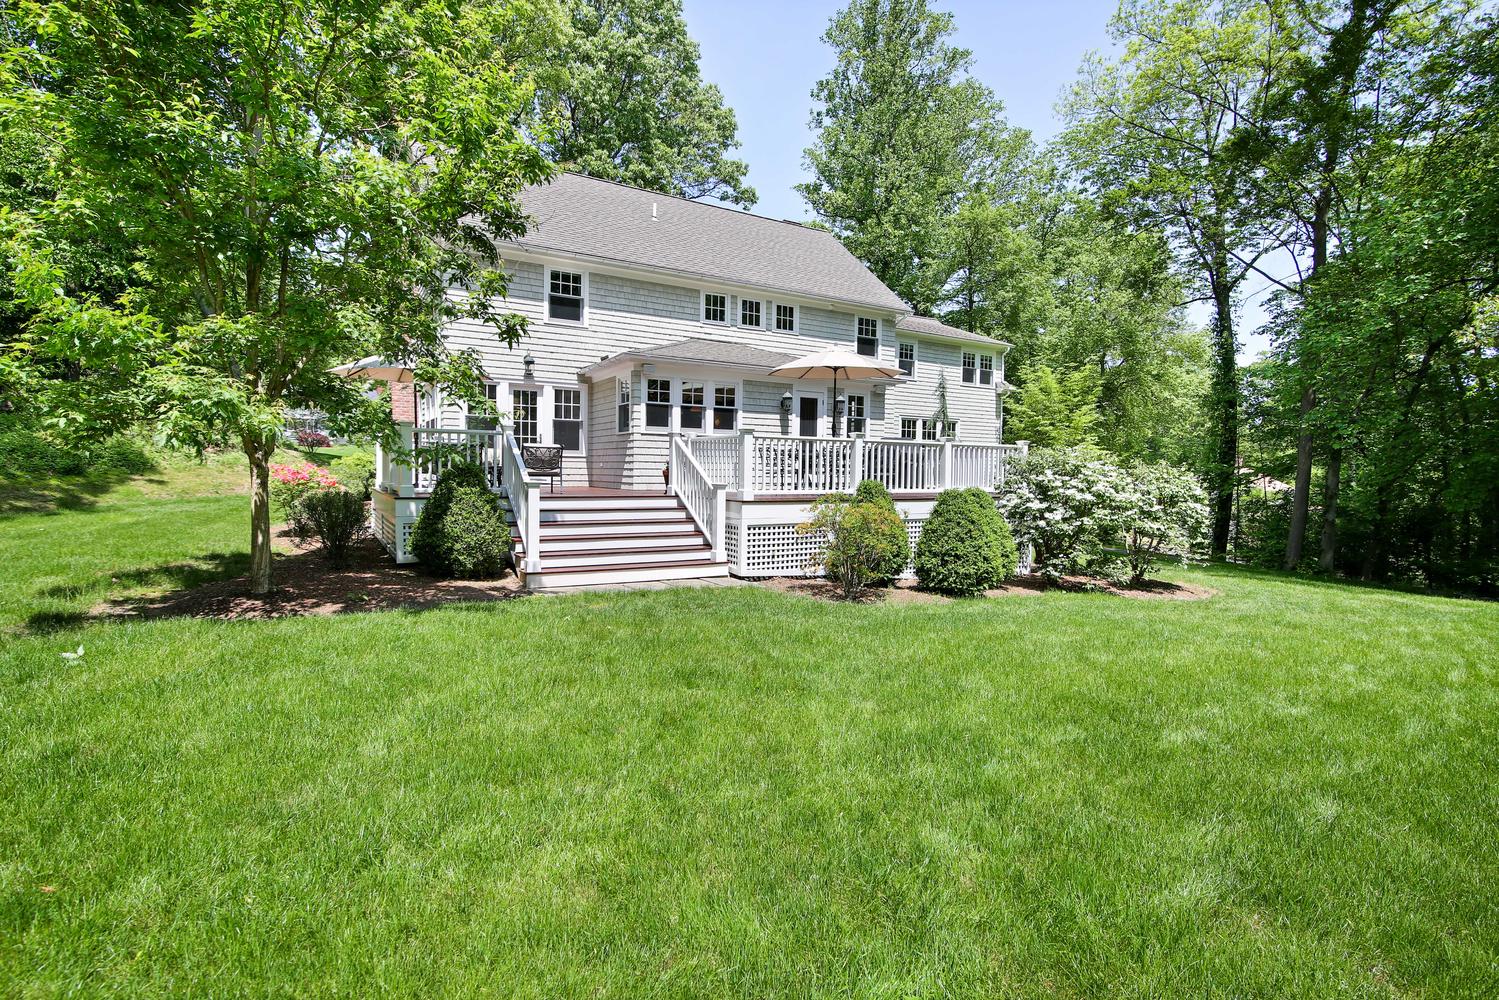 159 Hollydale Rd Fairfield CT-large-047-40-040-1499x1000-72dpi